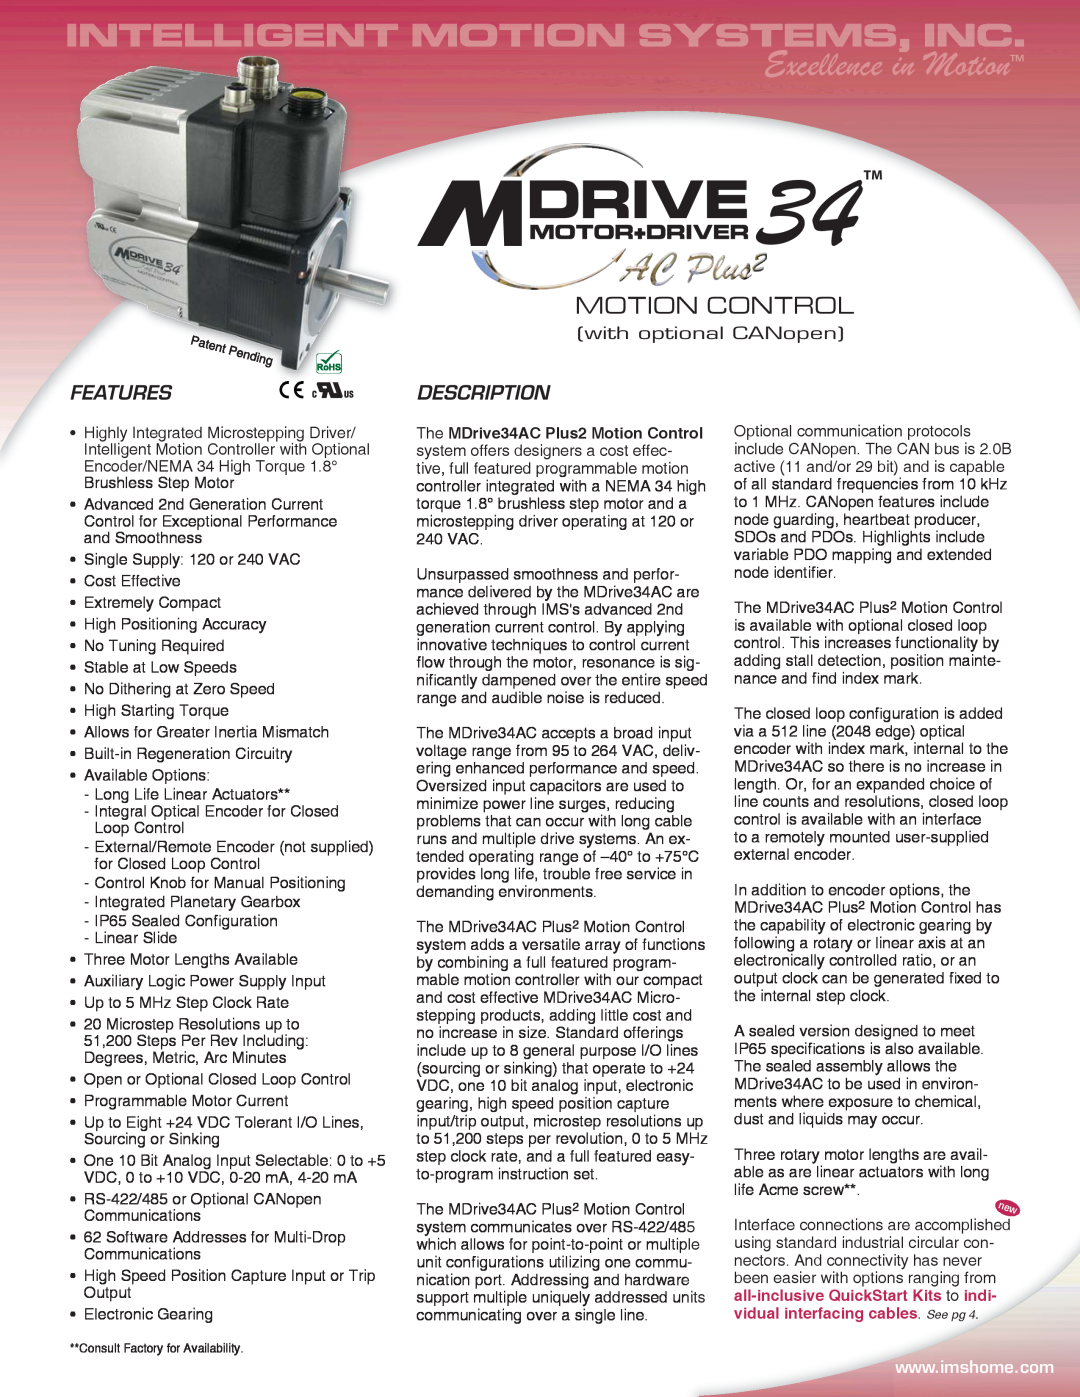 Intelligent Motion Systems MDI34 specifications mOTION CONTROL, Features, Description, with optional CANopen, 34TM 